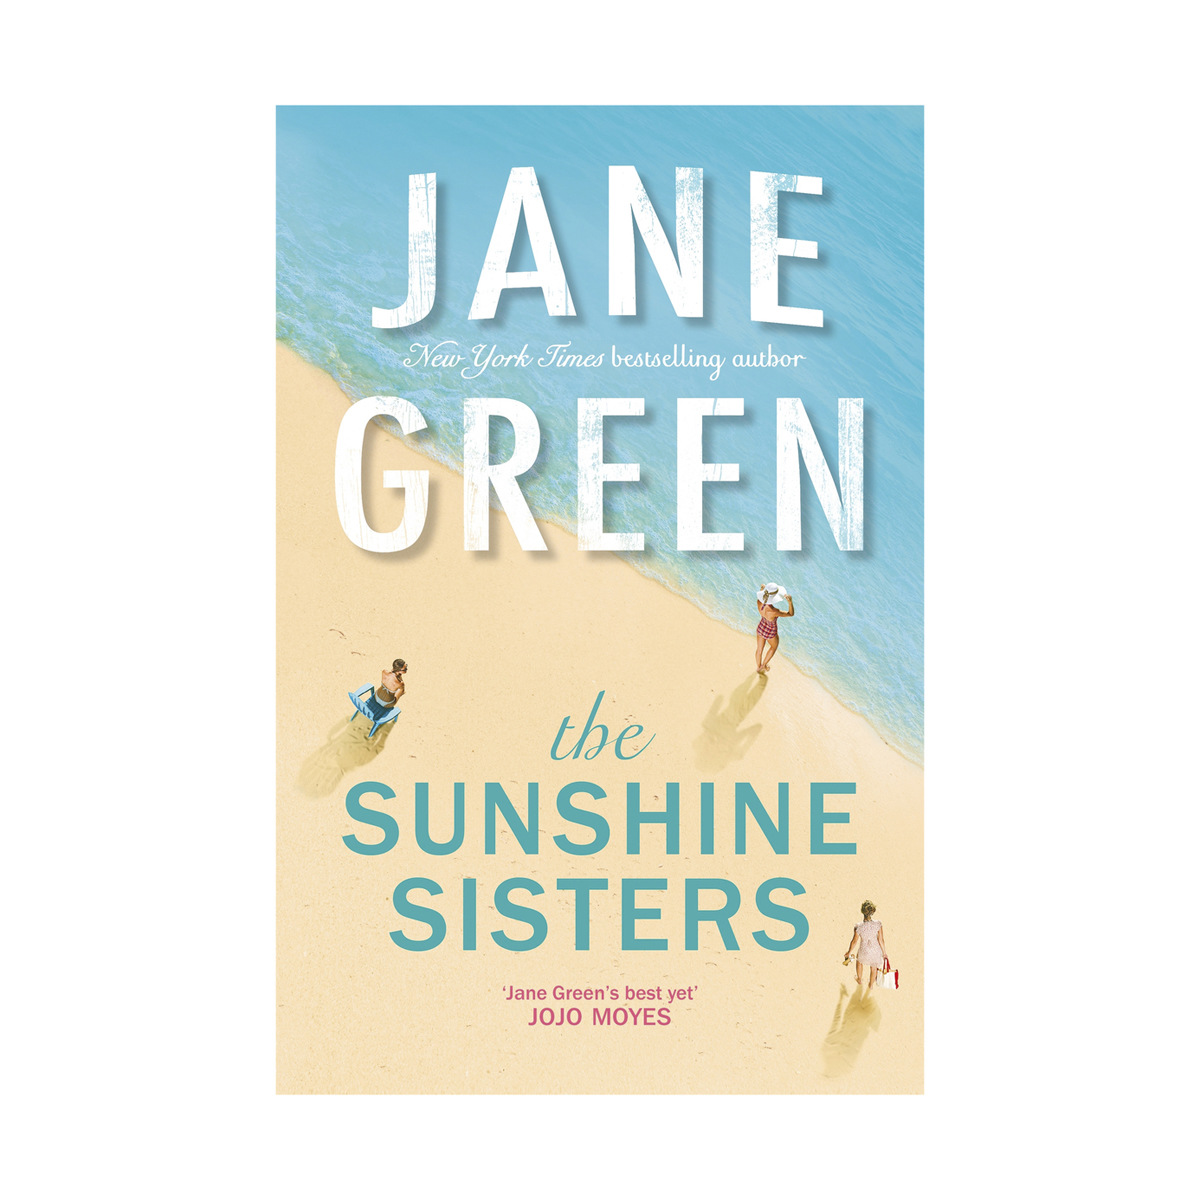 The Sunshine Sisters by Jane Green - Book